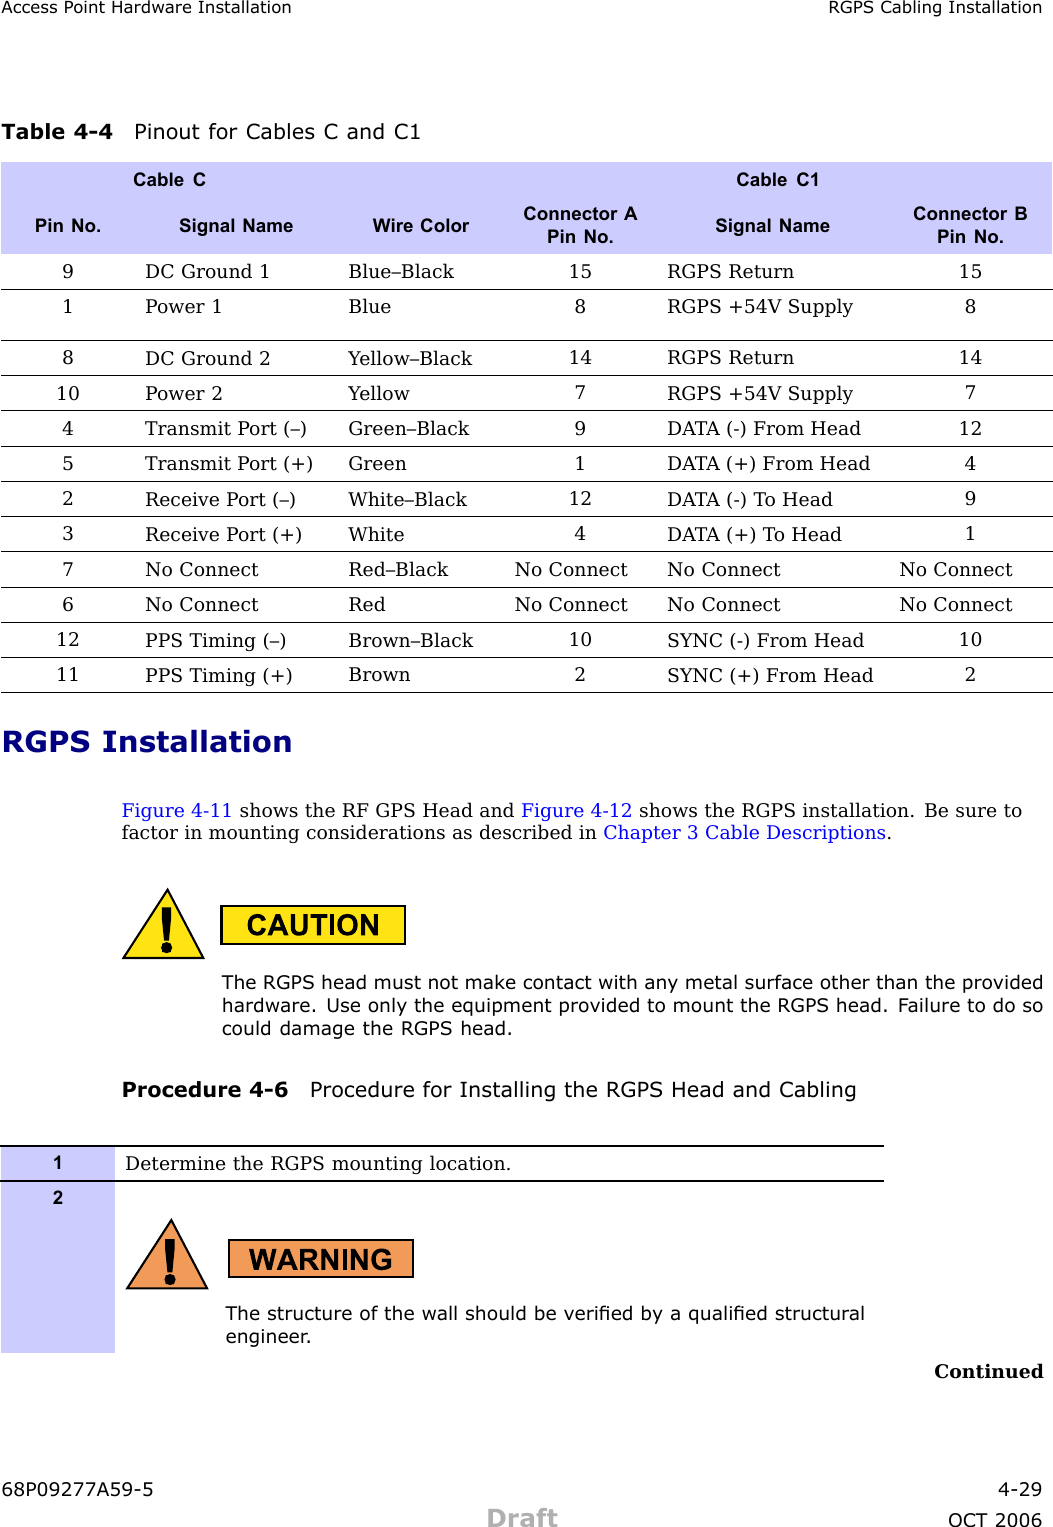 Access P oint Hardw are Installation RGPS Cabling InstallationTable 4 -4 Pinout for Cables C and C1Cable C Cable C1Pin No.Signal Name W ire ColorConnector APin No.Signal NameConnector BPin No.9DC Ground 1 Blue–Black15 RGPS Return 151 P ower 1Blue8RGPS +54V Supply88DC Ground 2 Y ellow–Black14 RGPS Return 1410 P ower 2Y ellow7RGPS +54V Supply74Transmit P ort (–) Green–Black9DA T A (-) From Head125Transmit P ort (+)Green 1DA T A (+) From Head42Receive P ort (–) White–Black12DA T A (-) T o Head93Receive P ort (+) White4DA T A (+) T o Head17No ConnectRed–BlackNo Connect No Connect No Connect6 No ConnectRedNo Connect No Connect No Connect12PPS Timing (–) Brown–Black10SYNC (-) From Head1011PPS Timing (+)Brown2SYNC (+) From Head2RGPS InstallationFigure 4 -11 shows the RF GPS Head and Figure 4 -12 shows the RGPS installation. Be sure tofactor in mounting considerations as described in Chapter 3 Cable Descriptions .The RGPS head must not mak e contact with an y metal surface other than the pro videdhardw are. Use only the equipment pro vided to mount the RGPS head. F ailure to do socould damage the RGPS head.Procedure 4 -6 Procedure for Installing the RGPS Head and Cabling1Determine the RGPS mounting location.2The structure of the w all should be v eried b y a qualied structur alengineer .Continued68P09277A59 -5 4 -29Draft OCT 2006